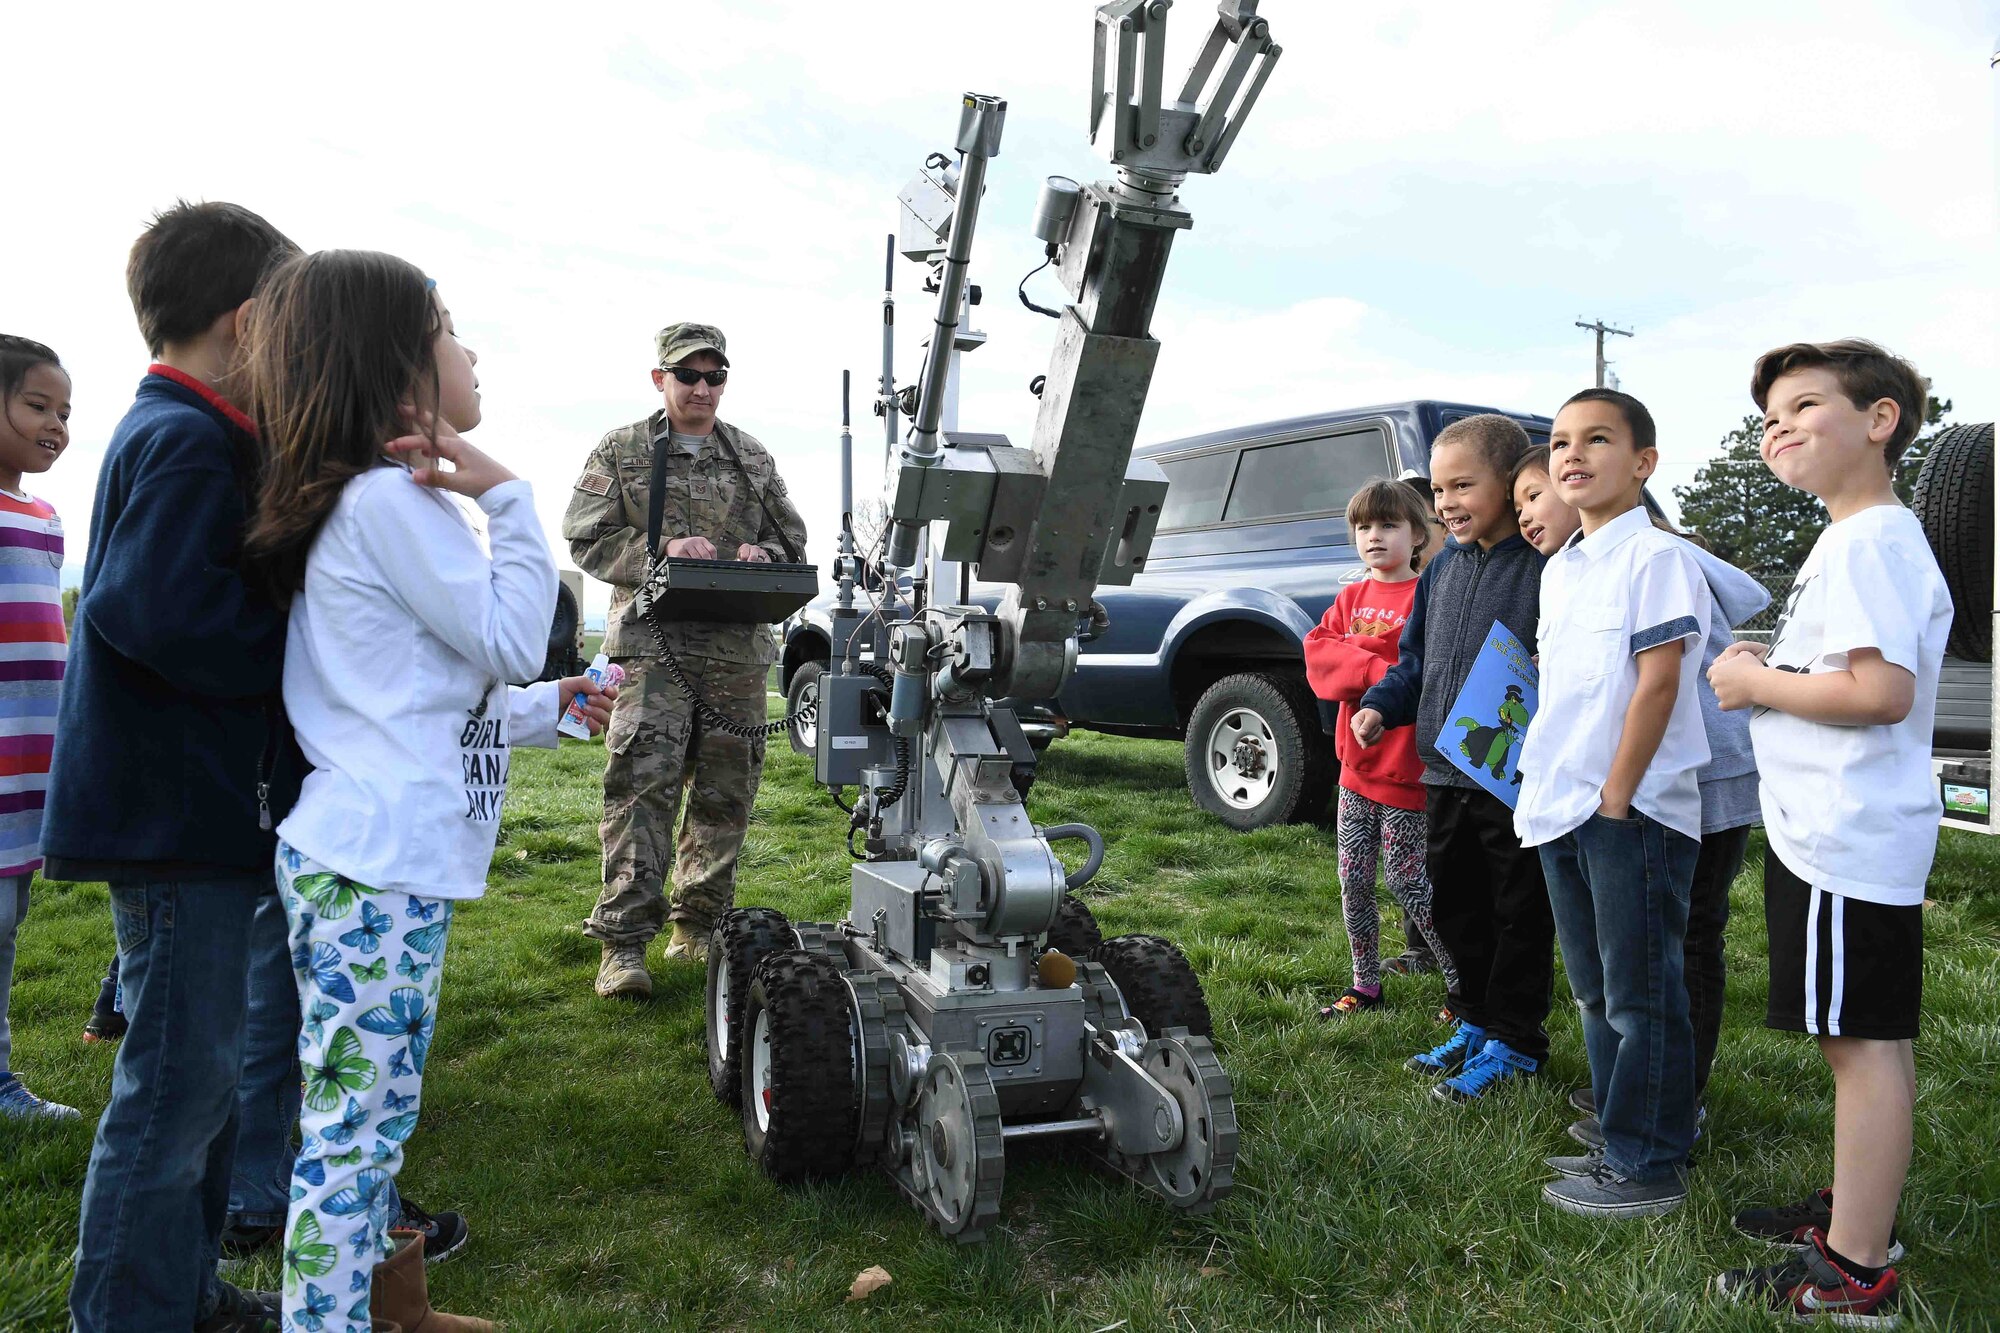 Tech. Sgt. Timothy Lincoln operates an explosive ordnance disposal robot during the Kids Deployment Day event, Hill Field Elementary, Utah, April 12, 2017. (U.S. Air Force photo/R. Nial Bradshaw)